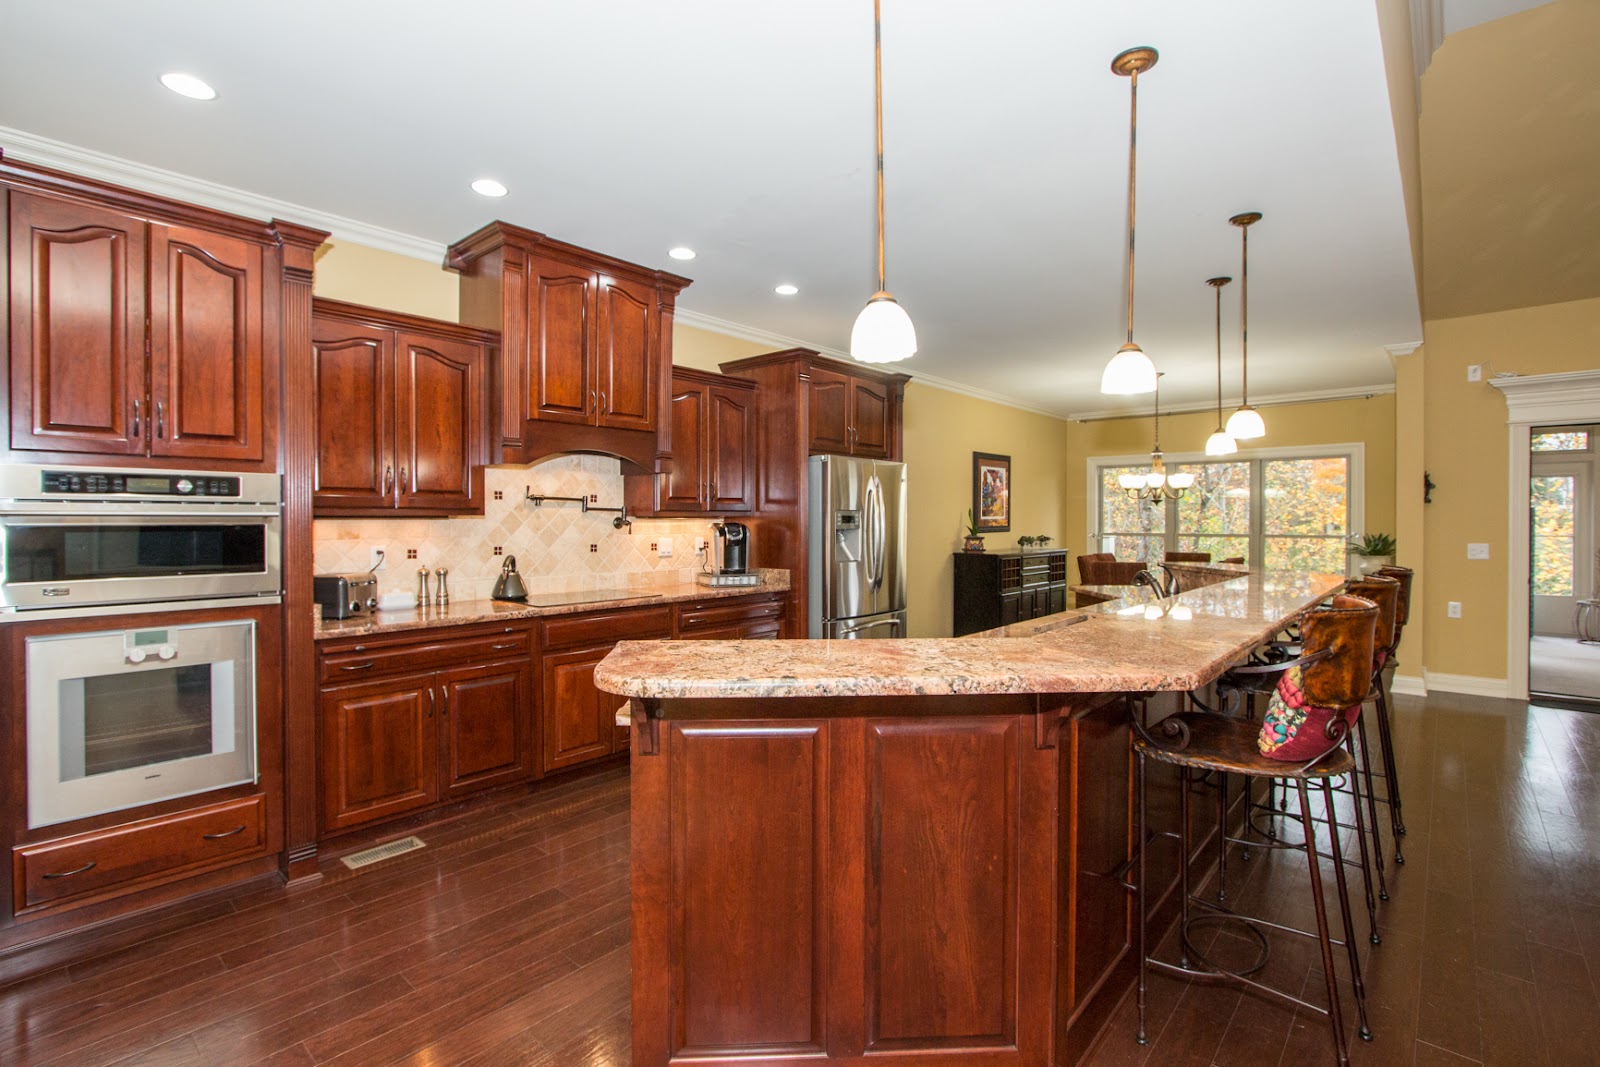 Beautiful gourmet kitchen features cherry cabinets, granite countertops!  This kitchen is open to the spacious Great Room for great entertaining!  This kitchen is in 10901 Jordain Drive, Louisville KY 40241, currently listed by Pam Ruckriegel 502-435-5524.